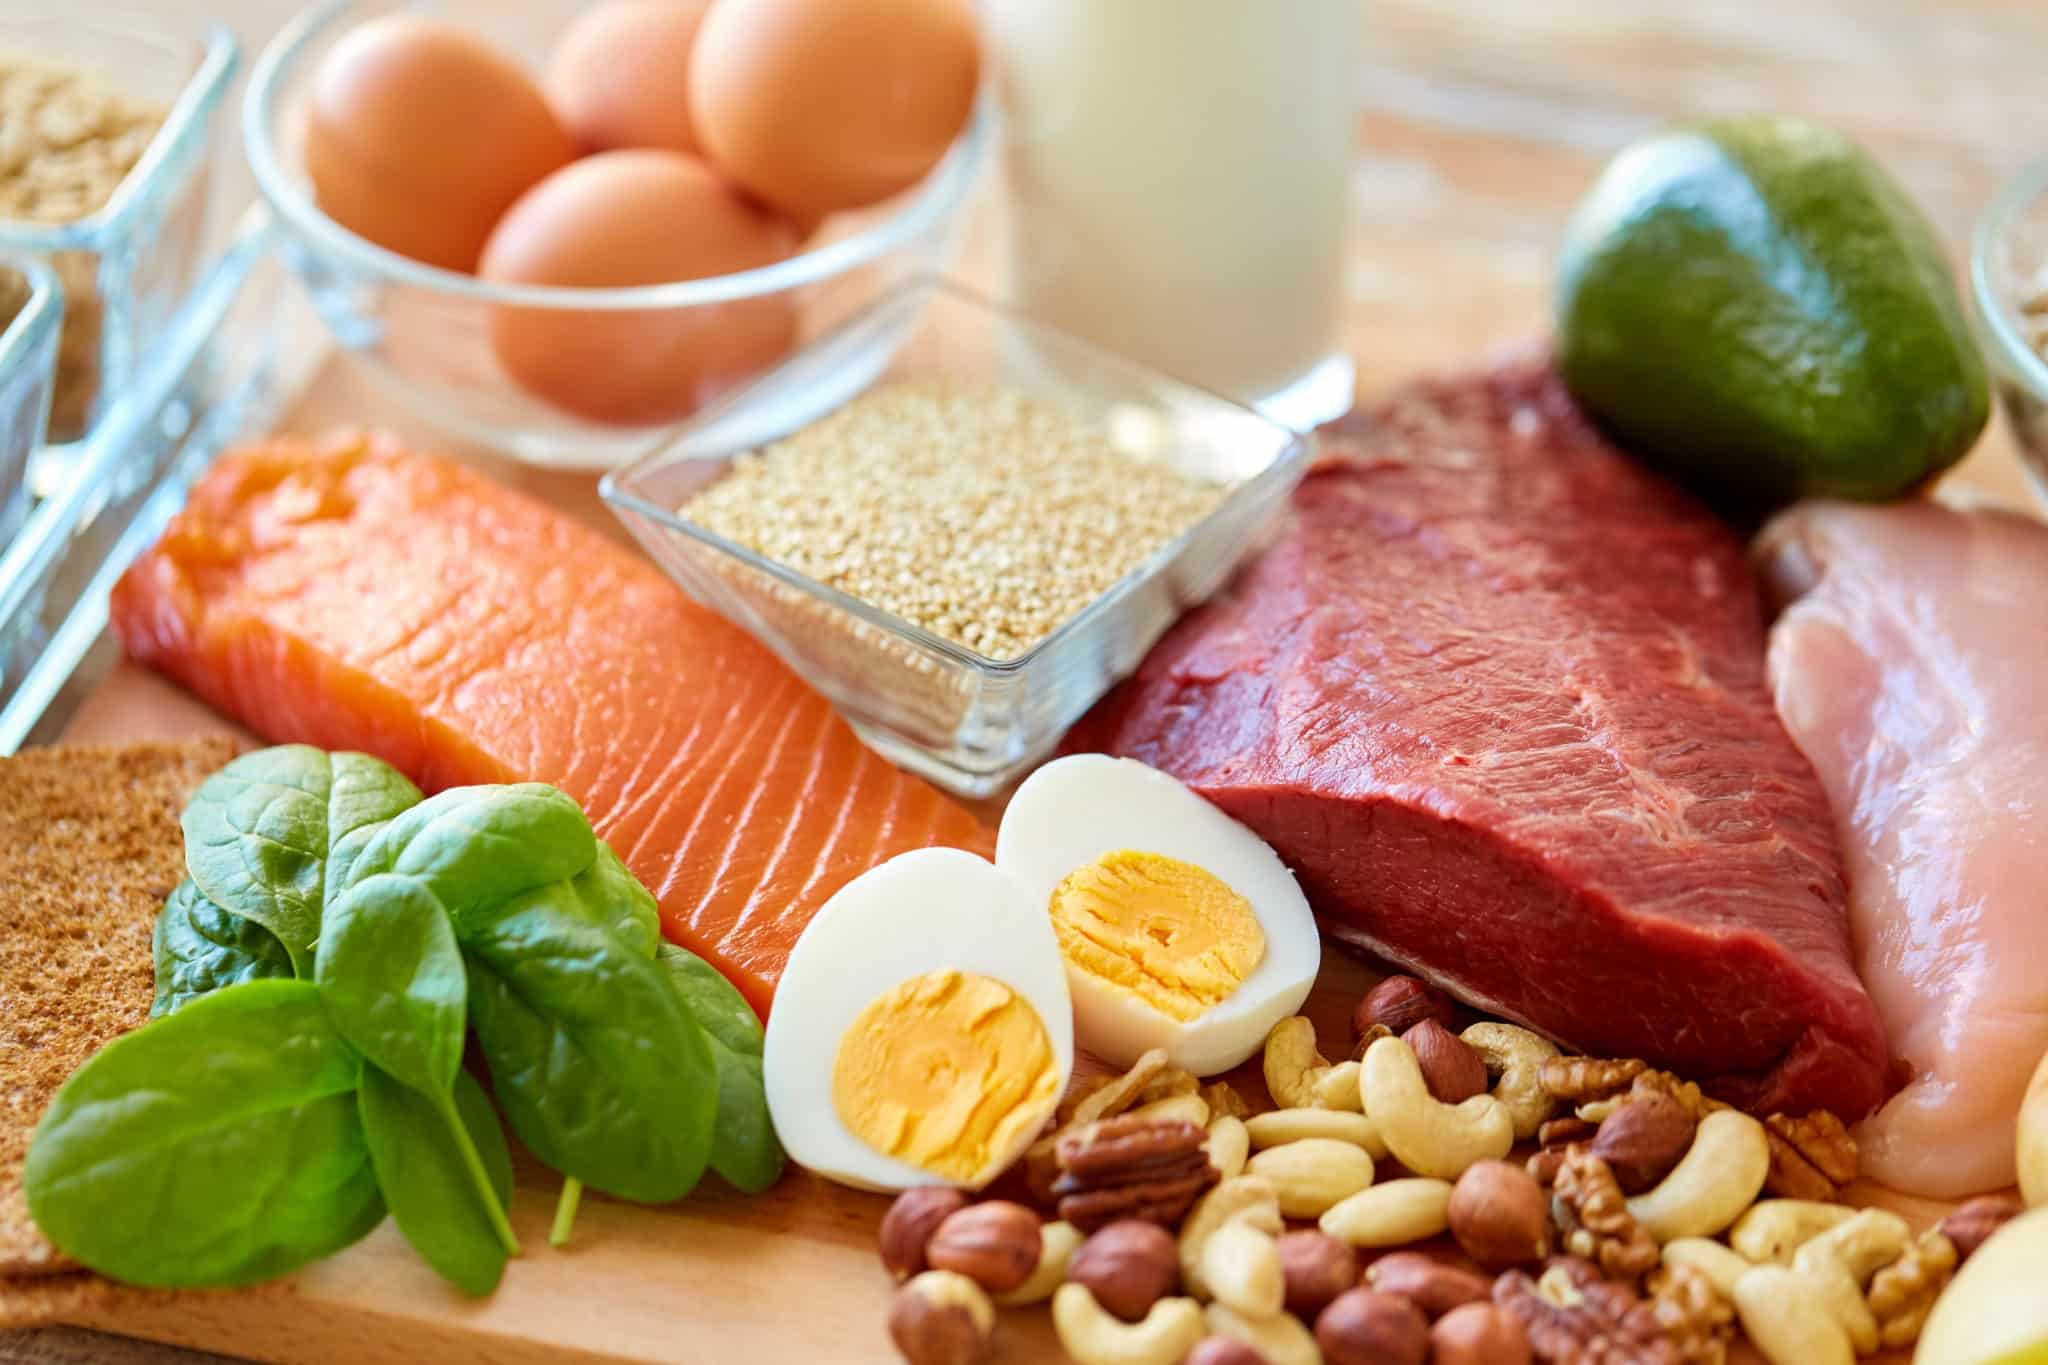 High-protein foods such as salmon, eggs, nuts, red meat, etc. on a table